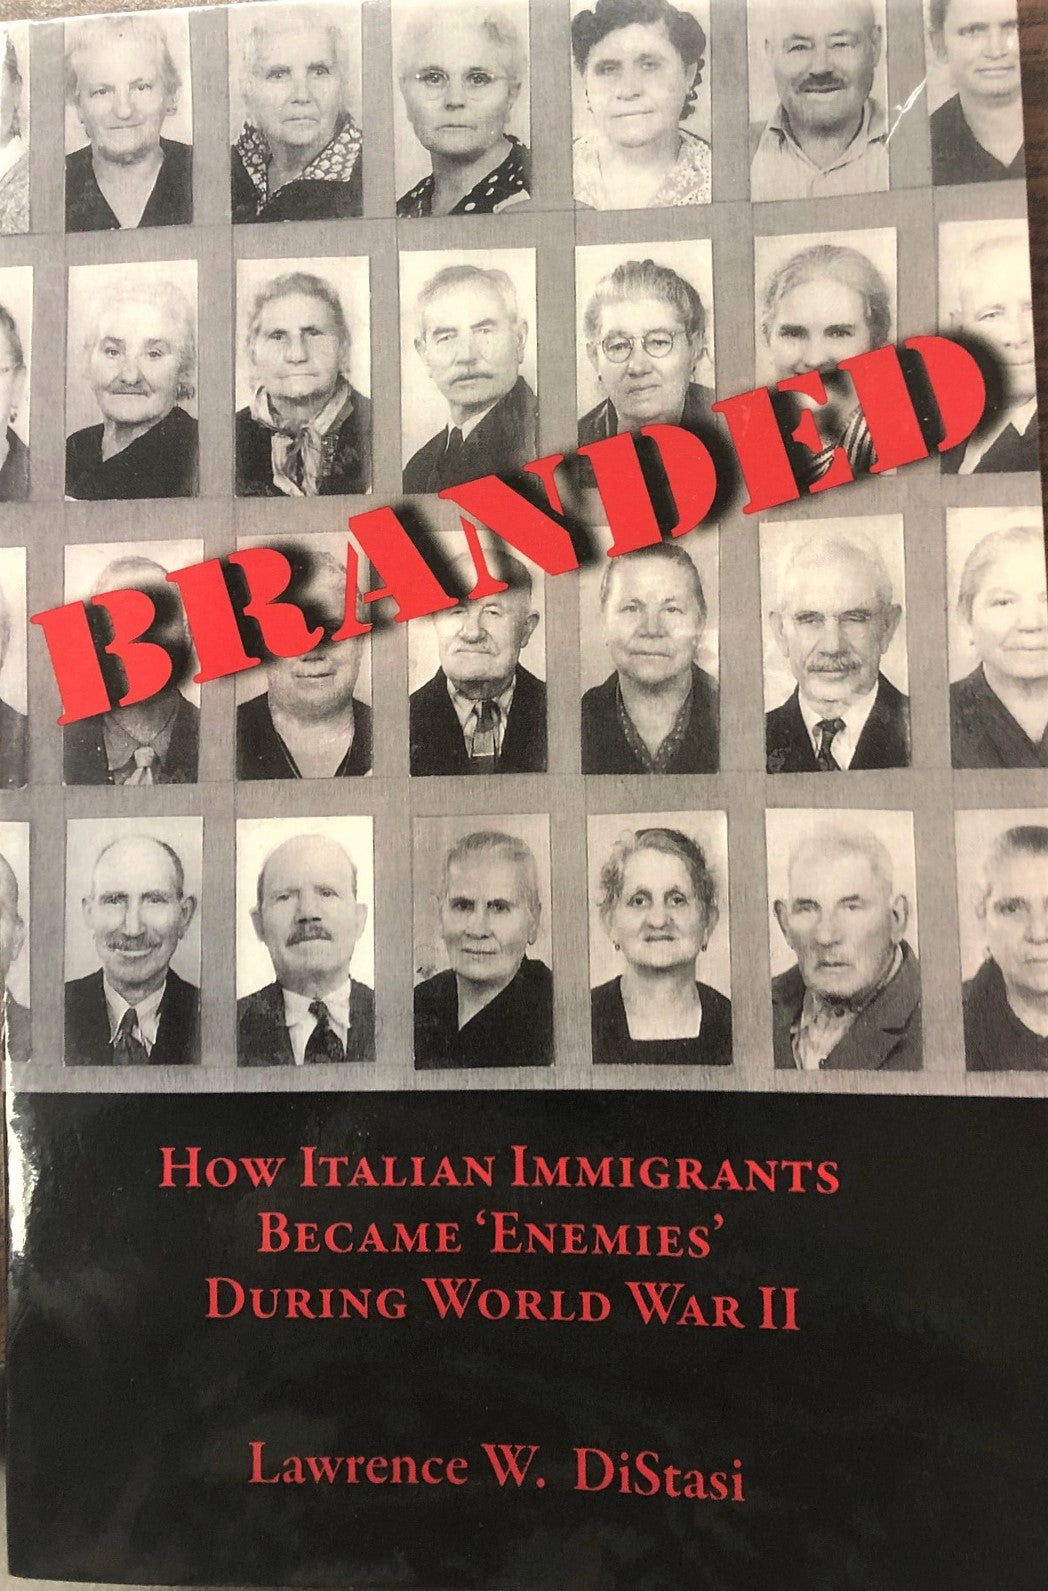 BRANDED: How Italian Immigrants Became 'Enemies' During World War II